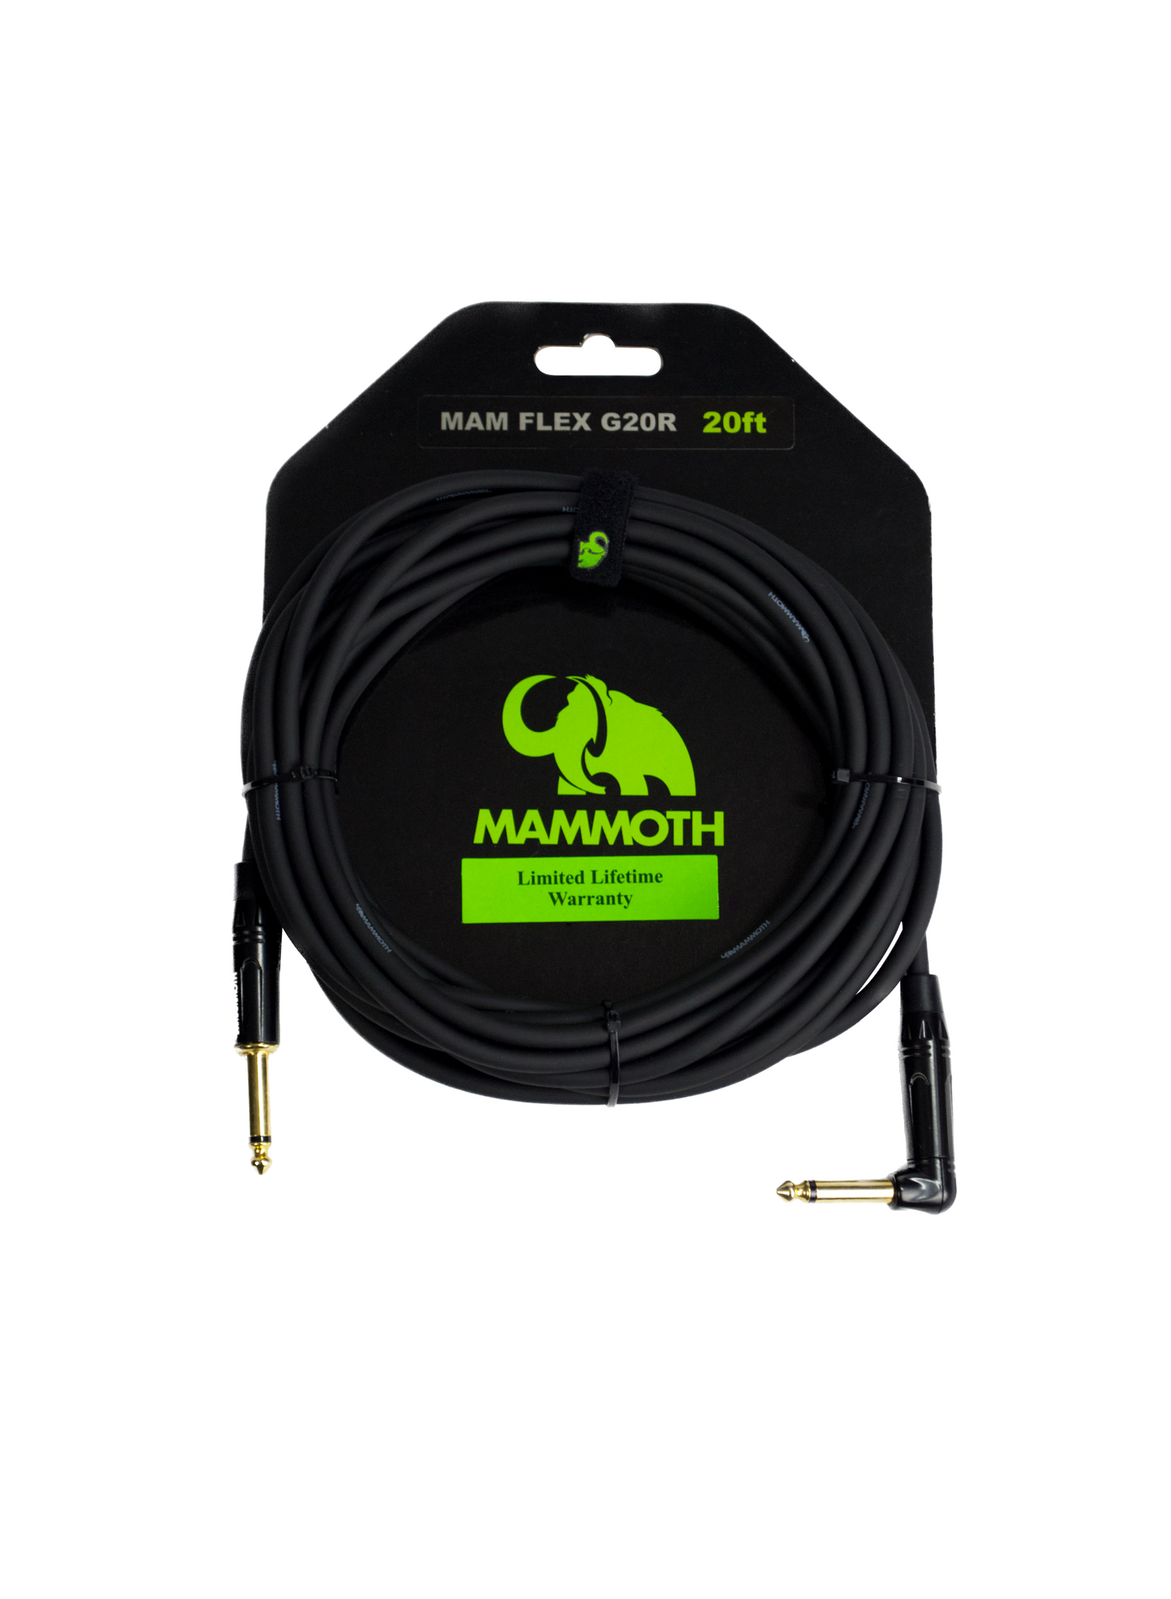 Mammoth Flex G20R 20ft Instrument Cable Right Angle Jack to Straight Jack